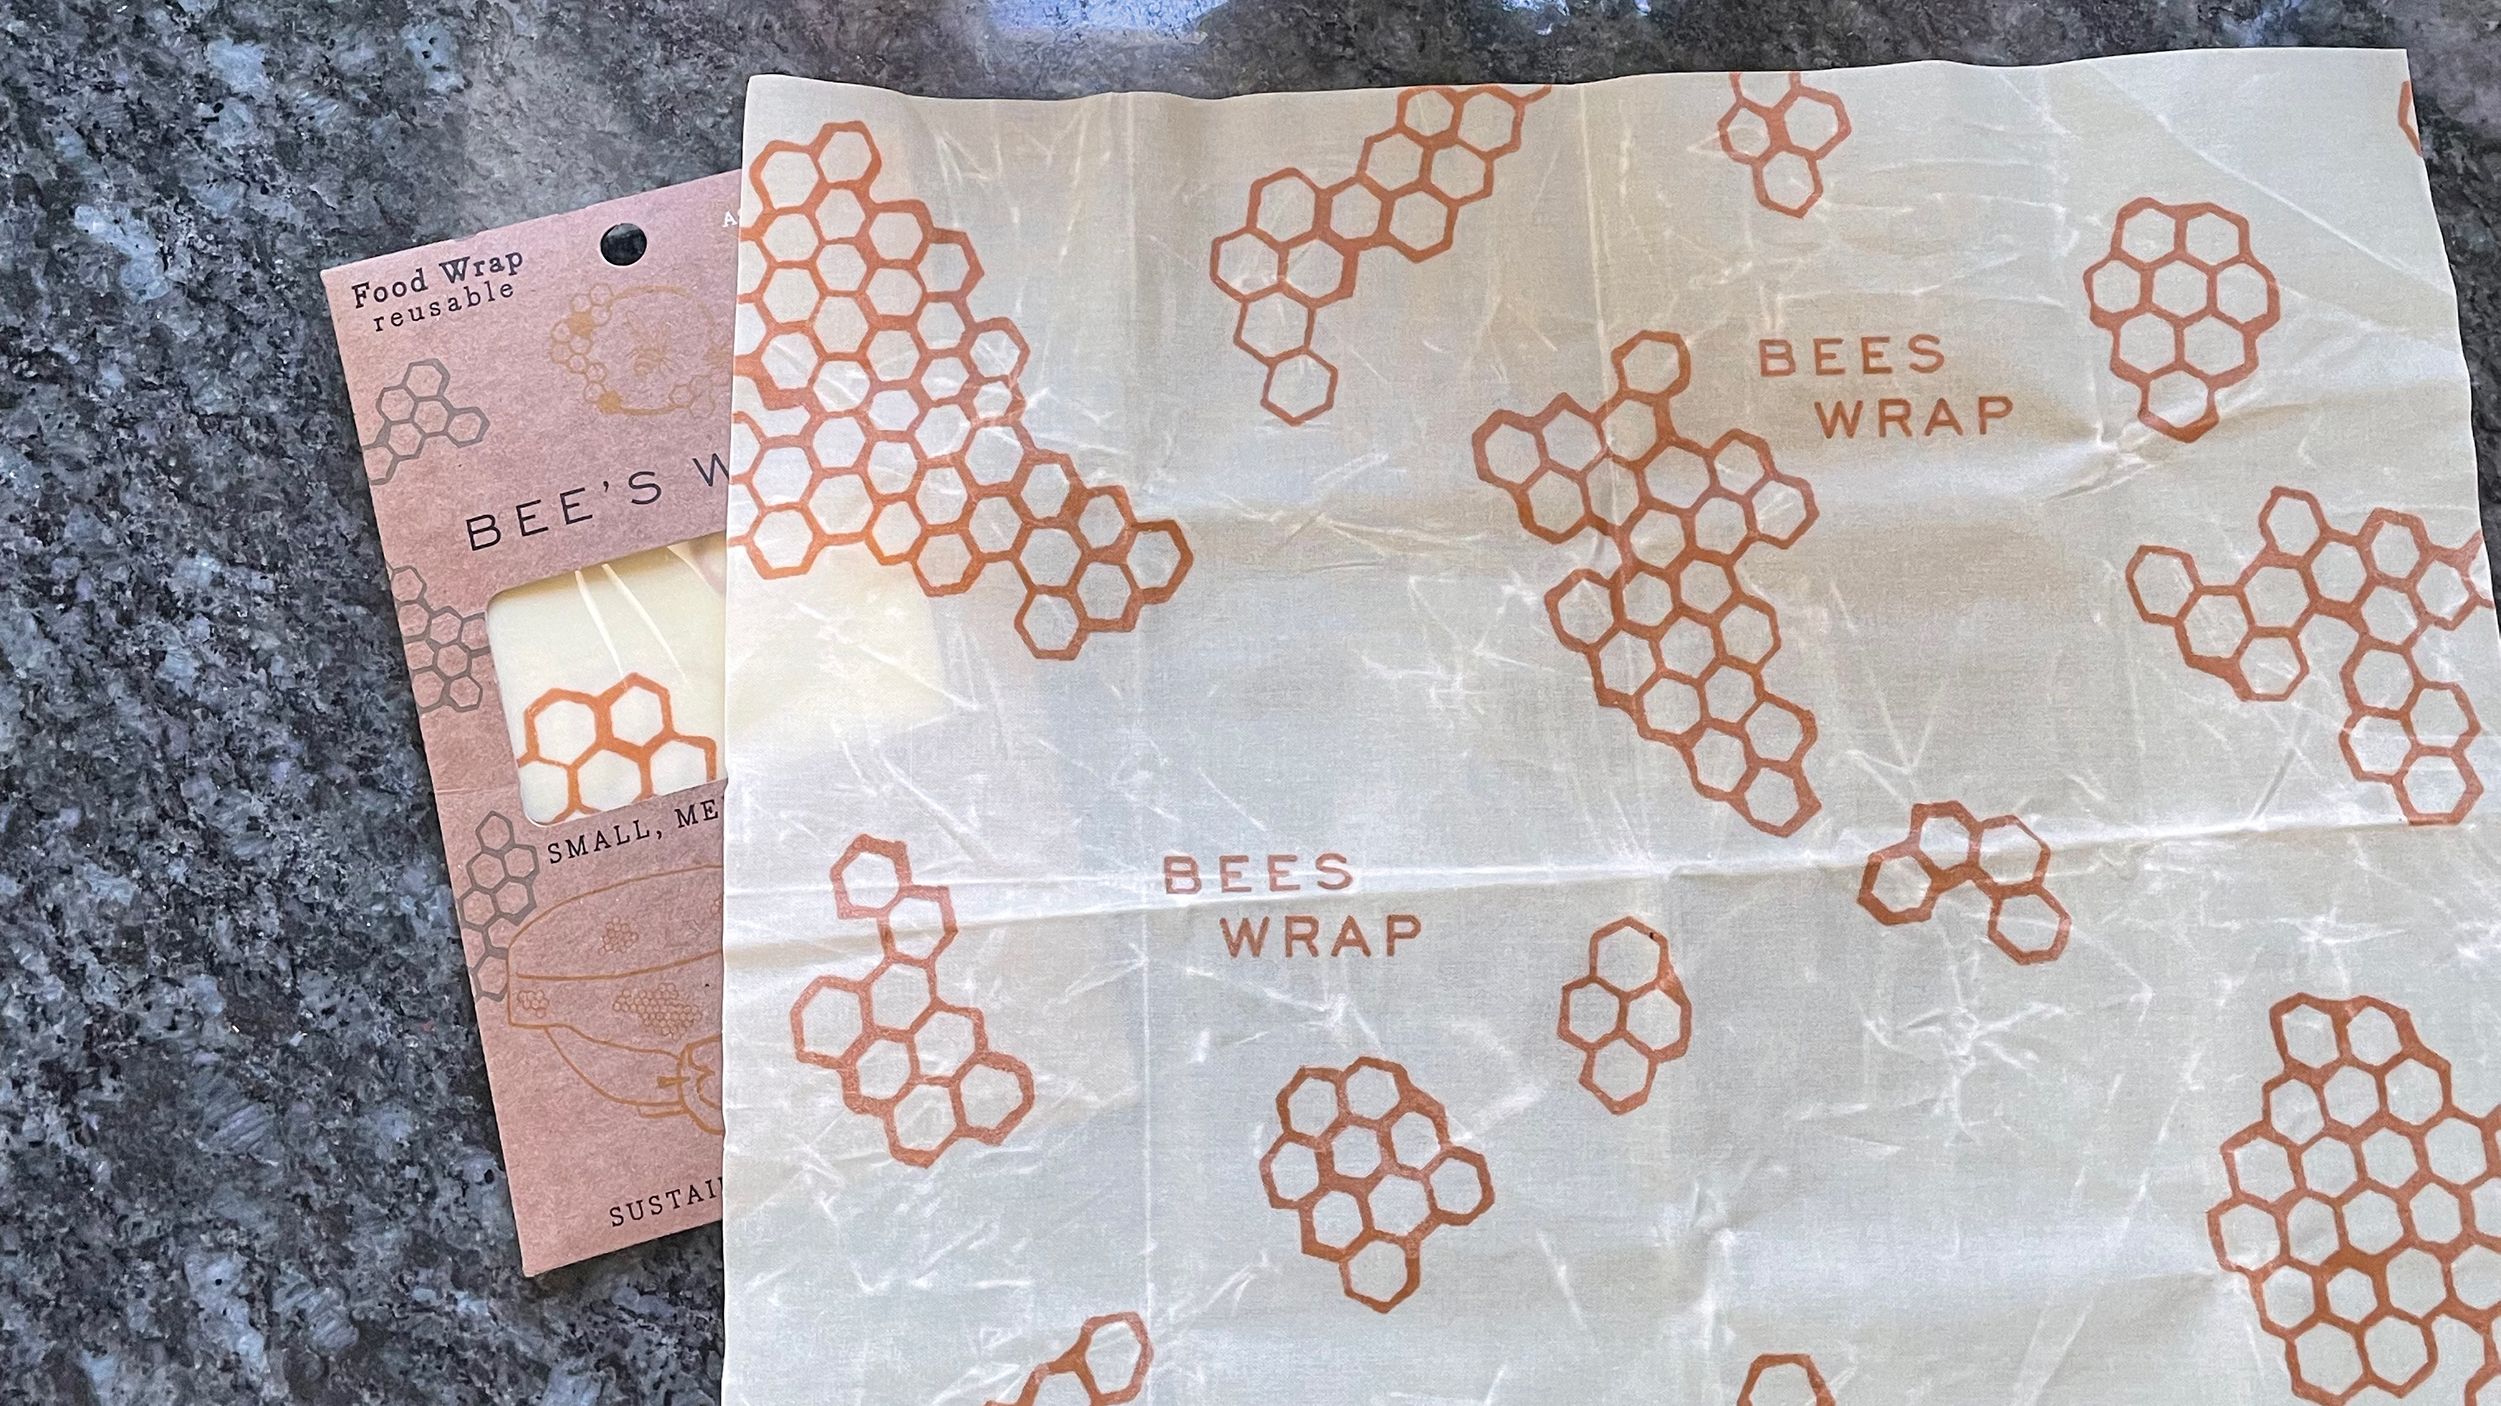 Our Beeswax Wraps are Tested and Certified Food Safe